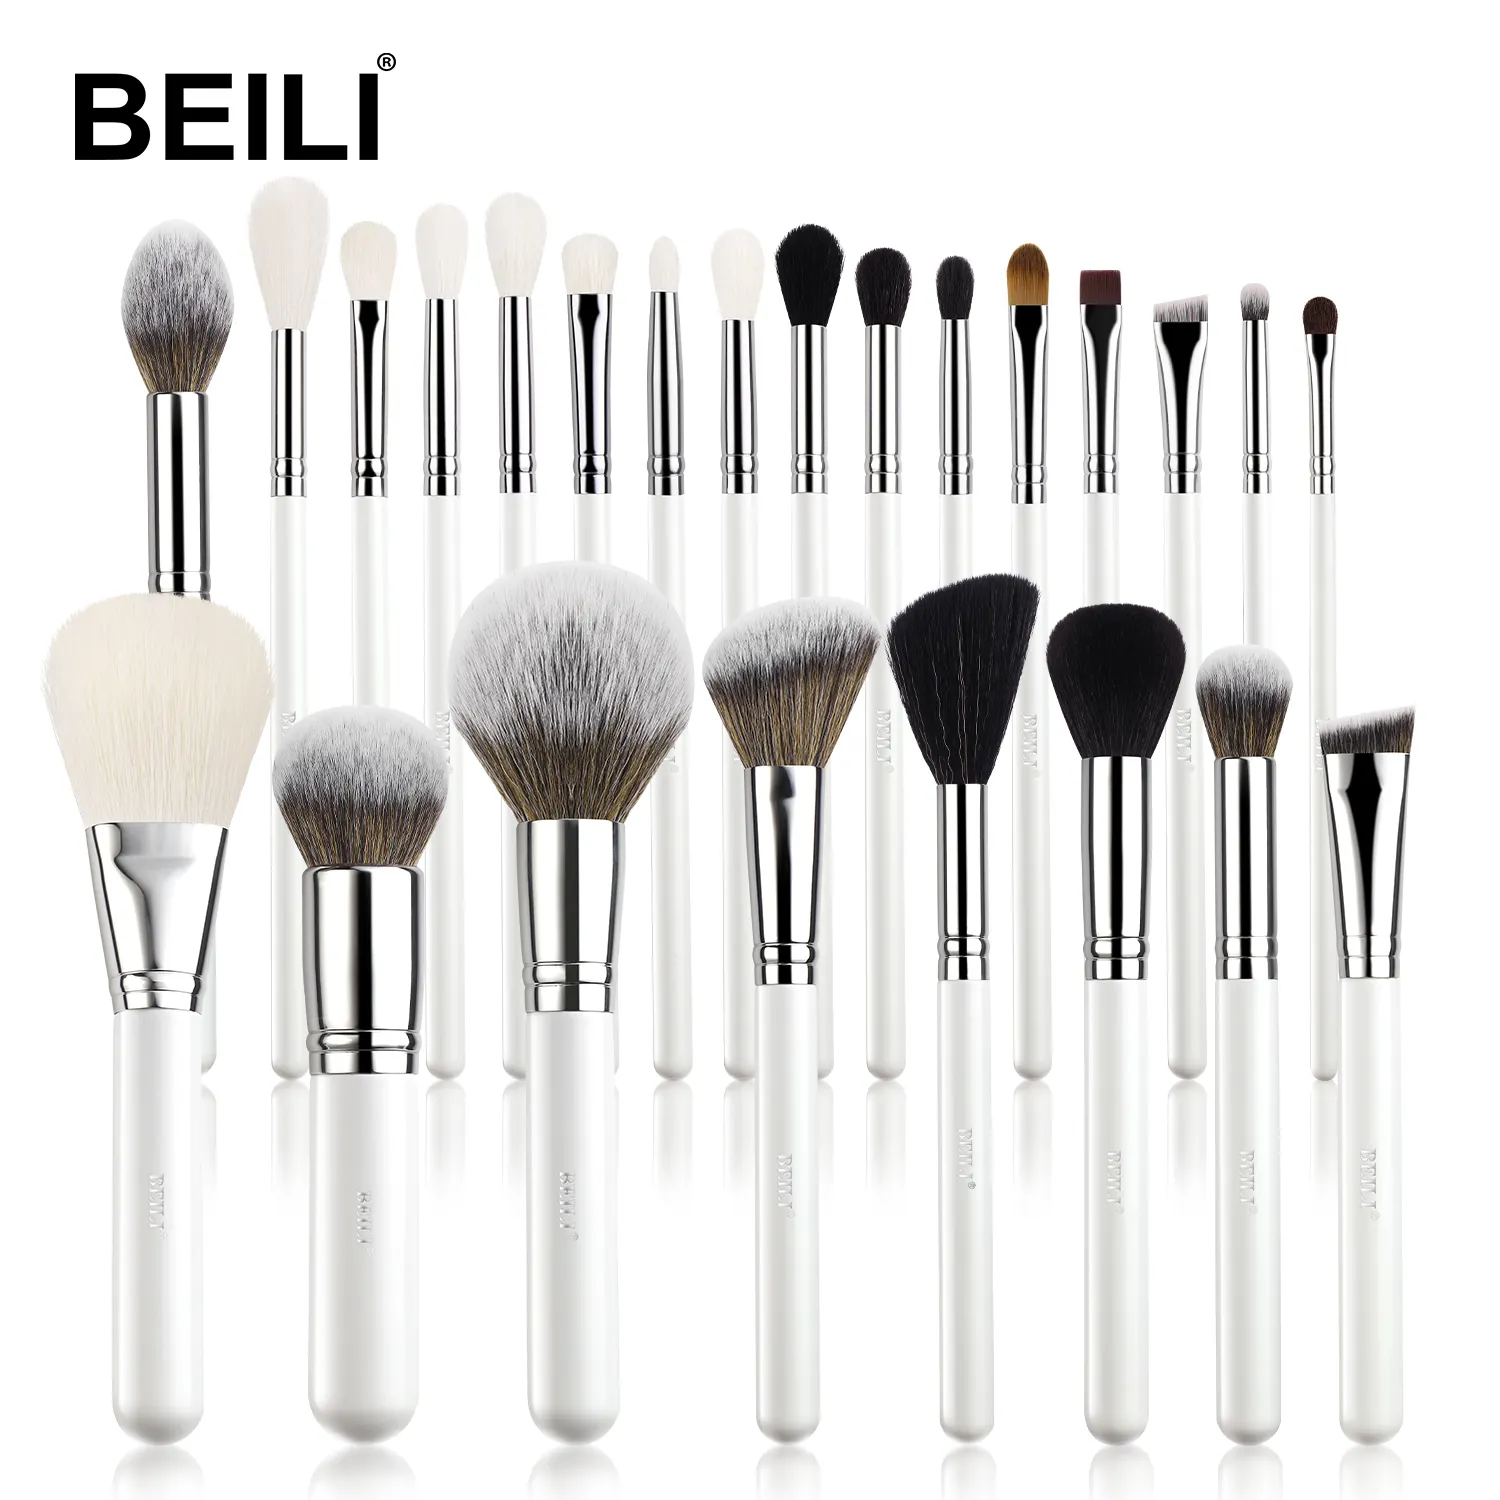 BEILI 24pcs bling set makeup brush with face makeup brushes foundation powder eye shadow blending brush private label accepted